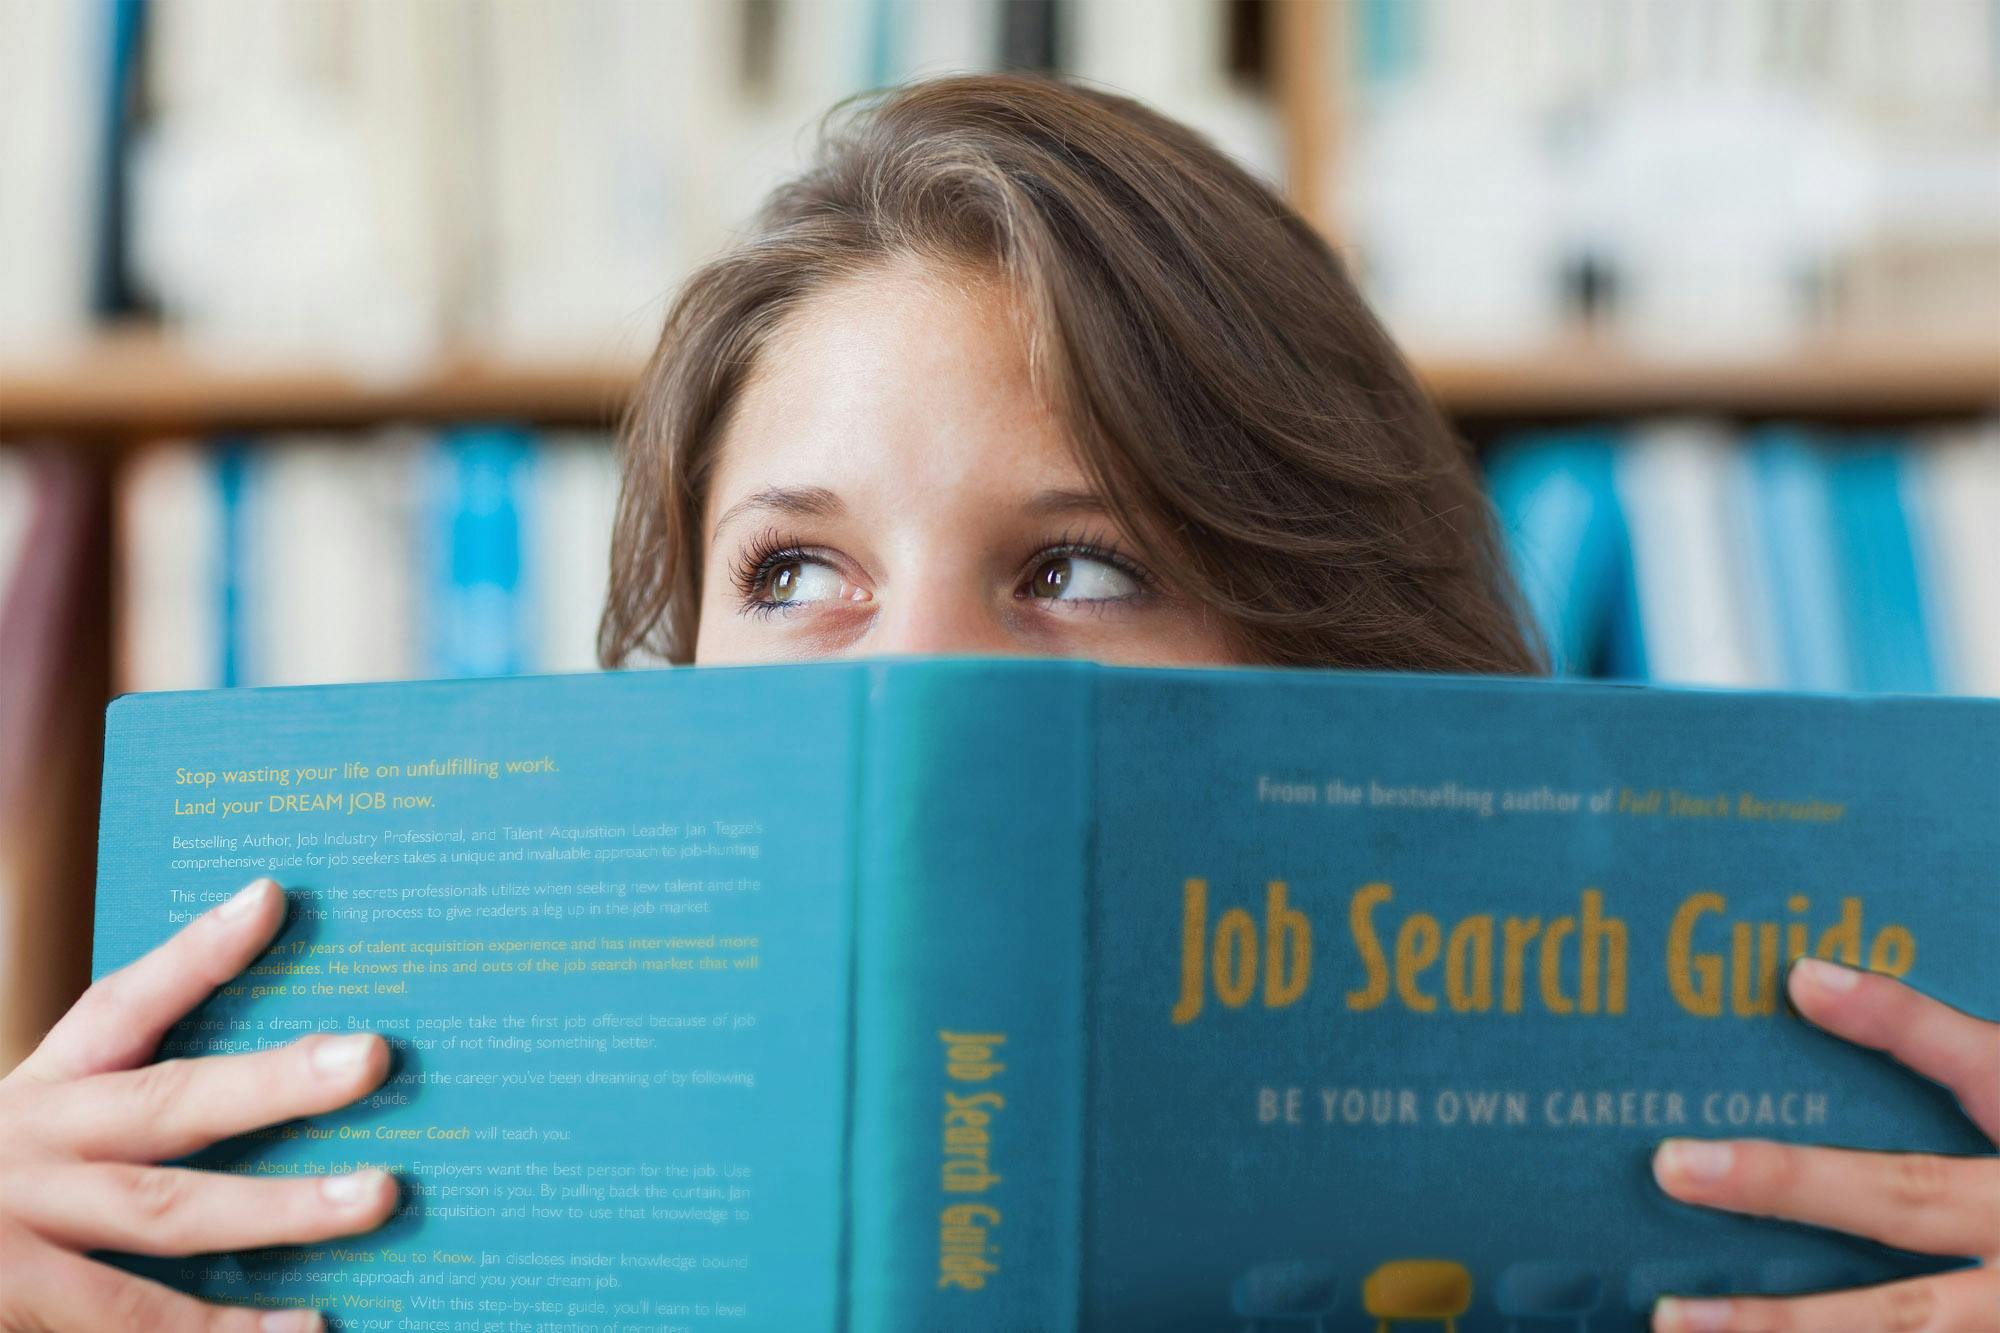 Image of Job Search Guide Book